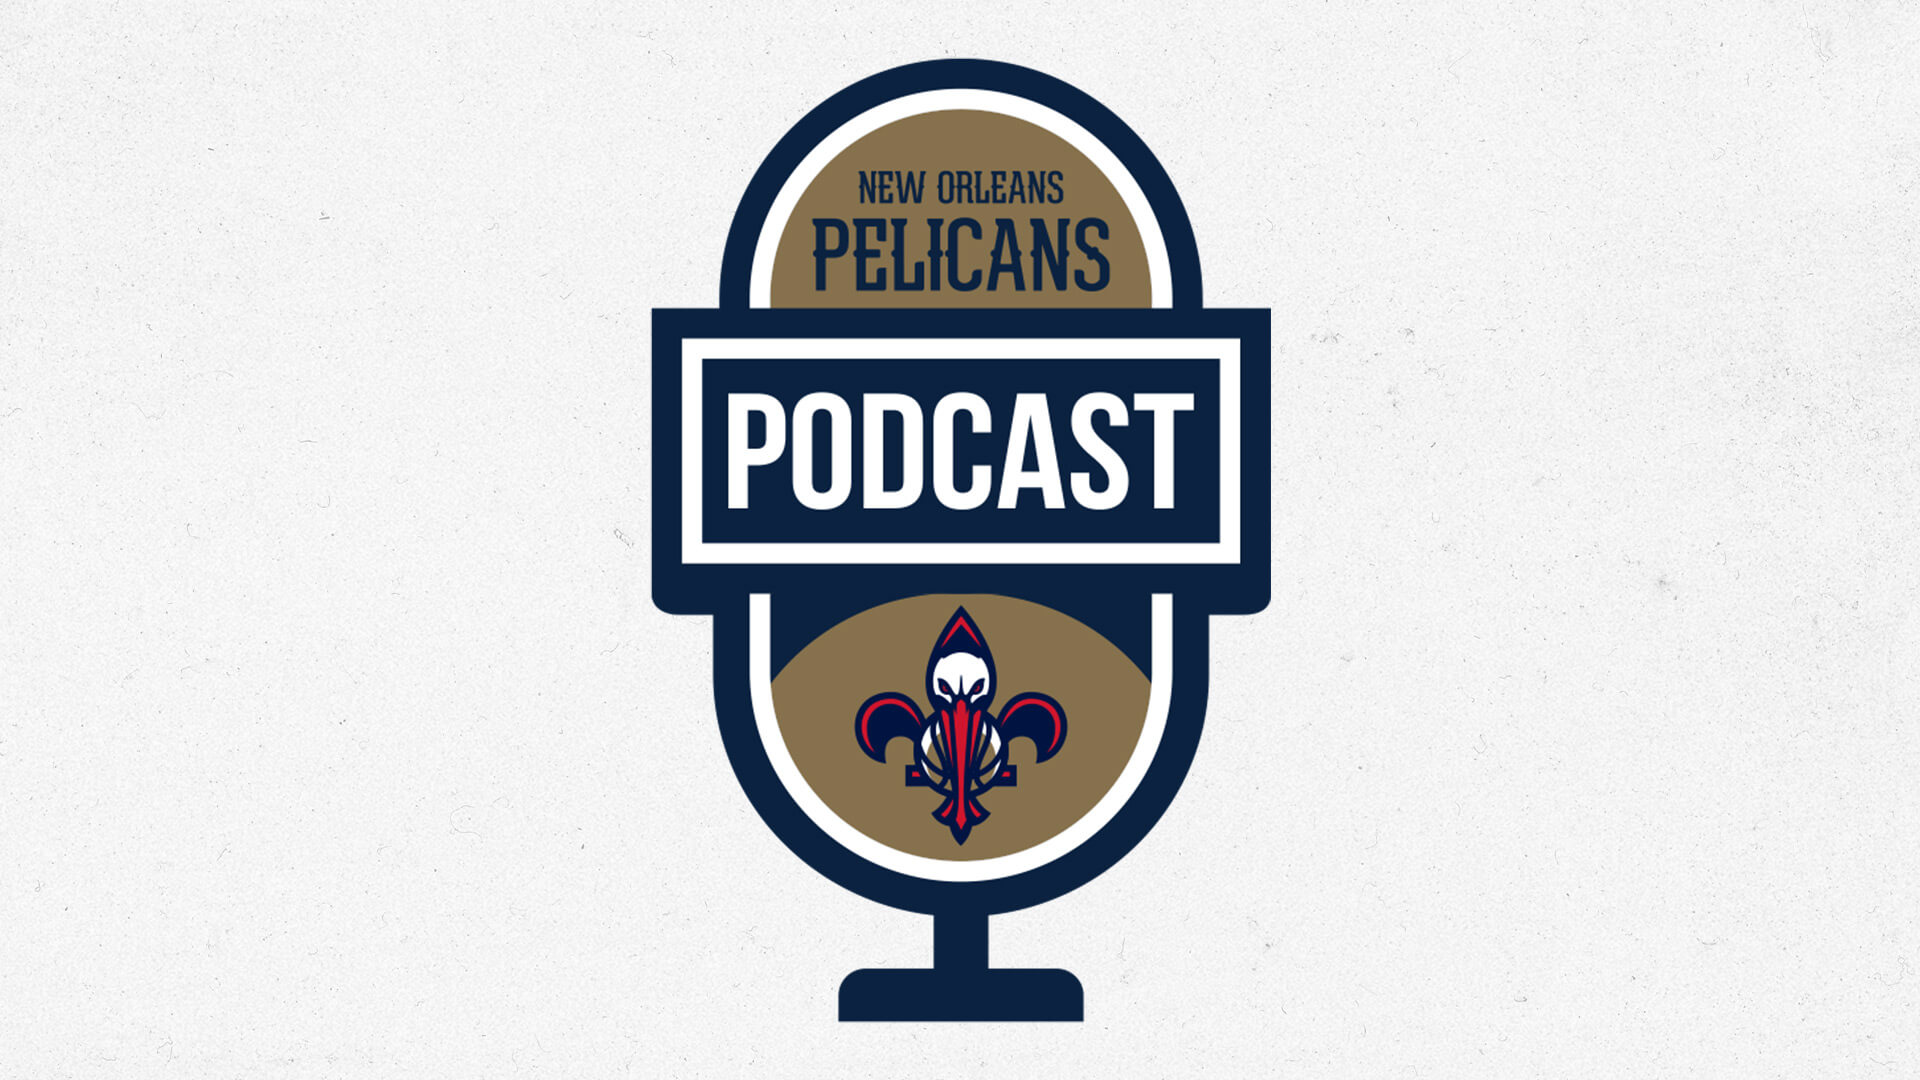 Erin Hartigan on Pelicans playoff push, loss to Lakers | Pelicans Podcast